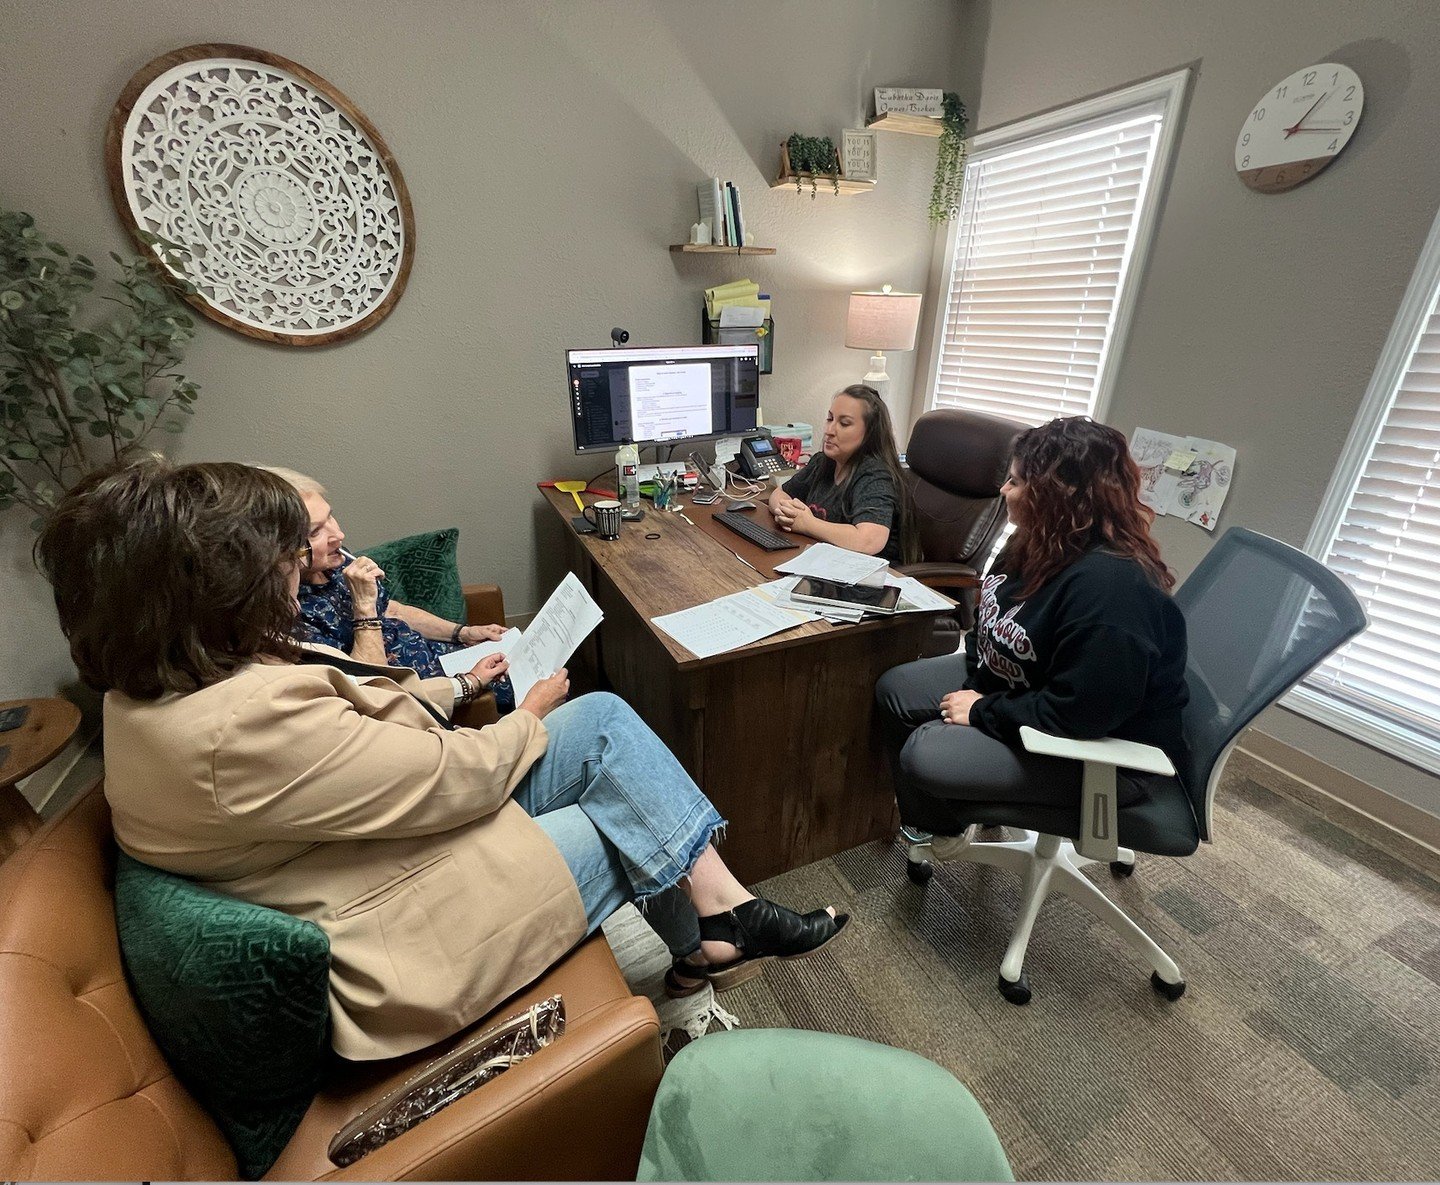 A big thank you to Alisha Houston for leading an enlightening session today on optimizing our social media strategies to better connect with our amazing clients! 
Your insights are so valuable to our team's growth and success. 
Here's to building str